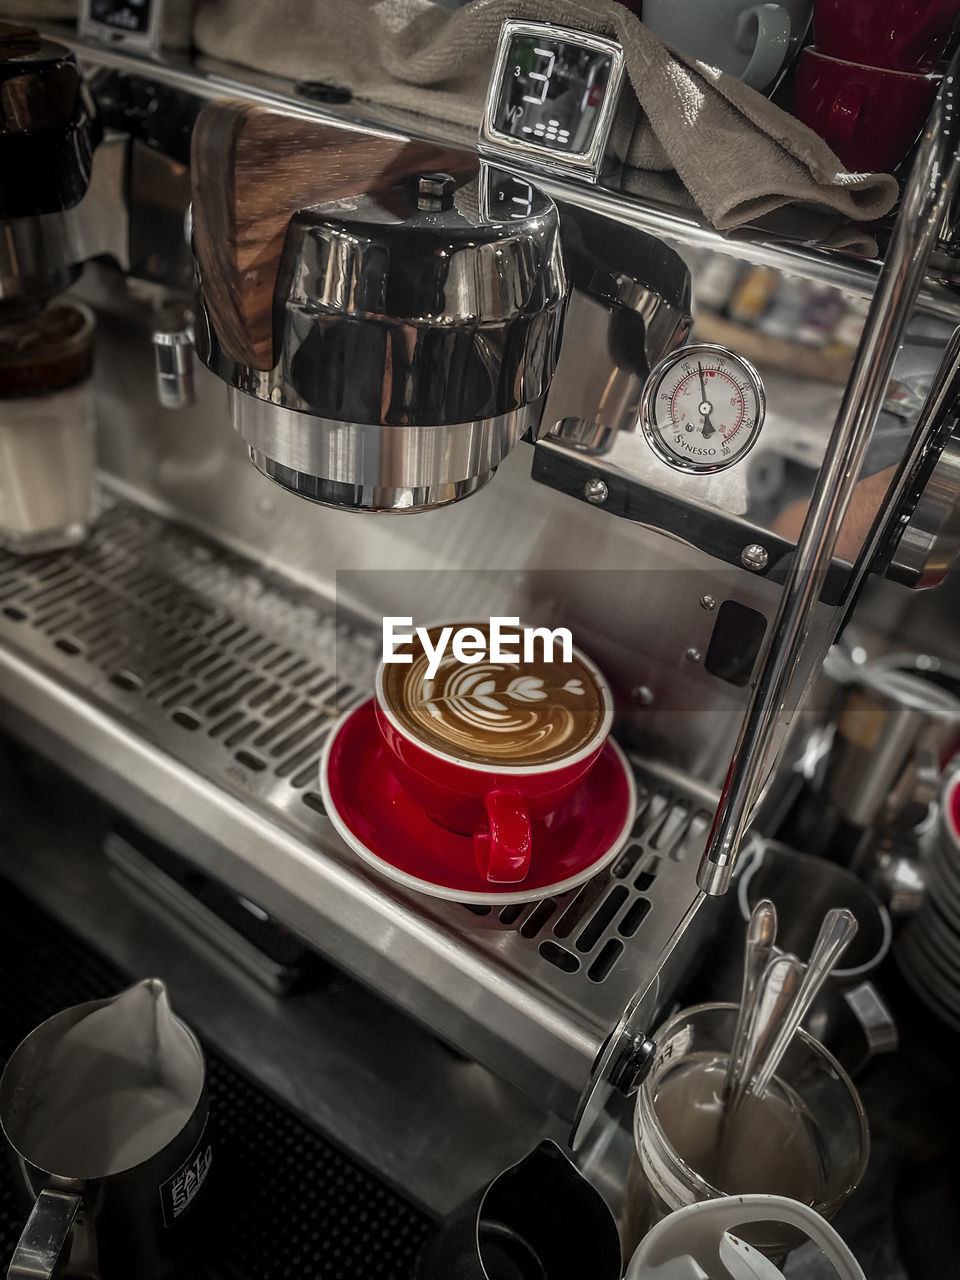 espresso machine, indoors, food and drink, kitchen, appliance, coffee, domestic room, drink, stove, espresso maker, food, no people, coffeemaker, car, household equipment, metal, domestic kitchen, burner - stove top, kitchen appliance, kitchen utensil, vehicle, machinery, home